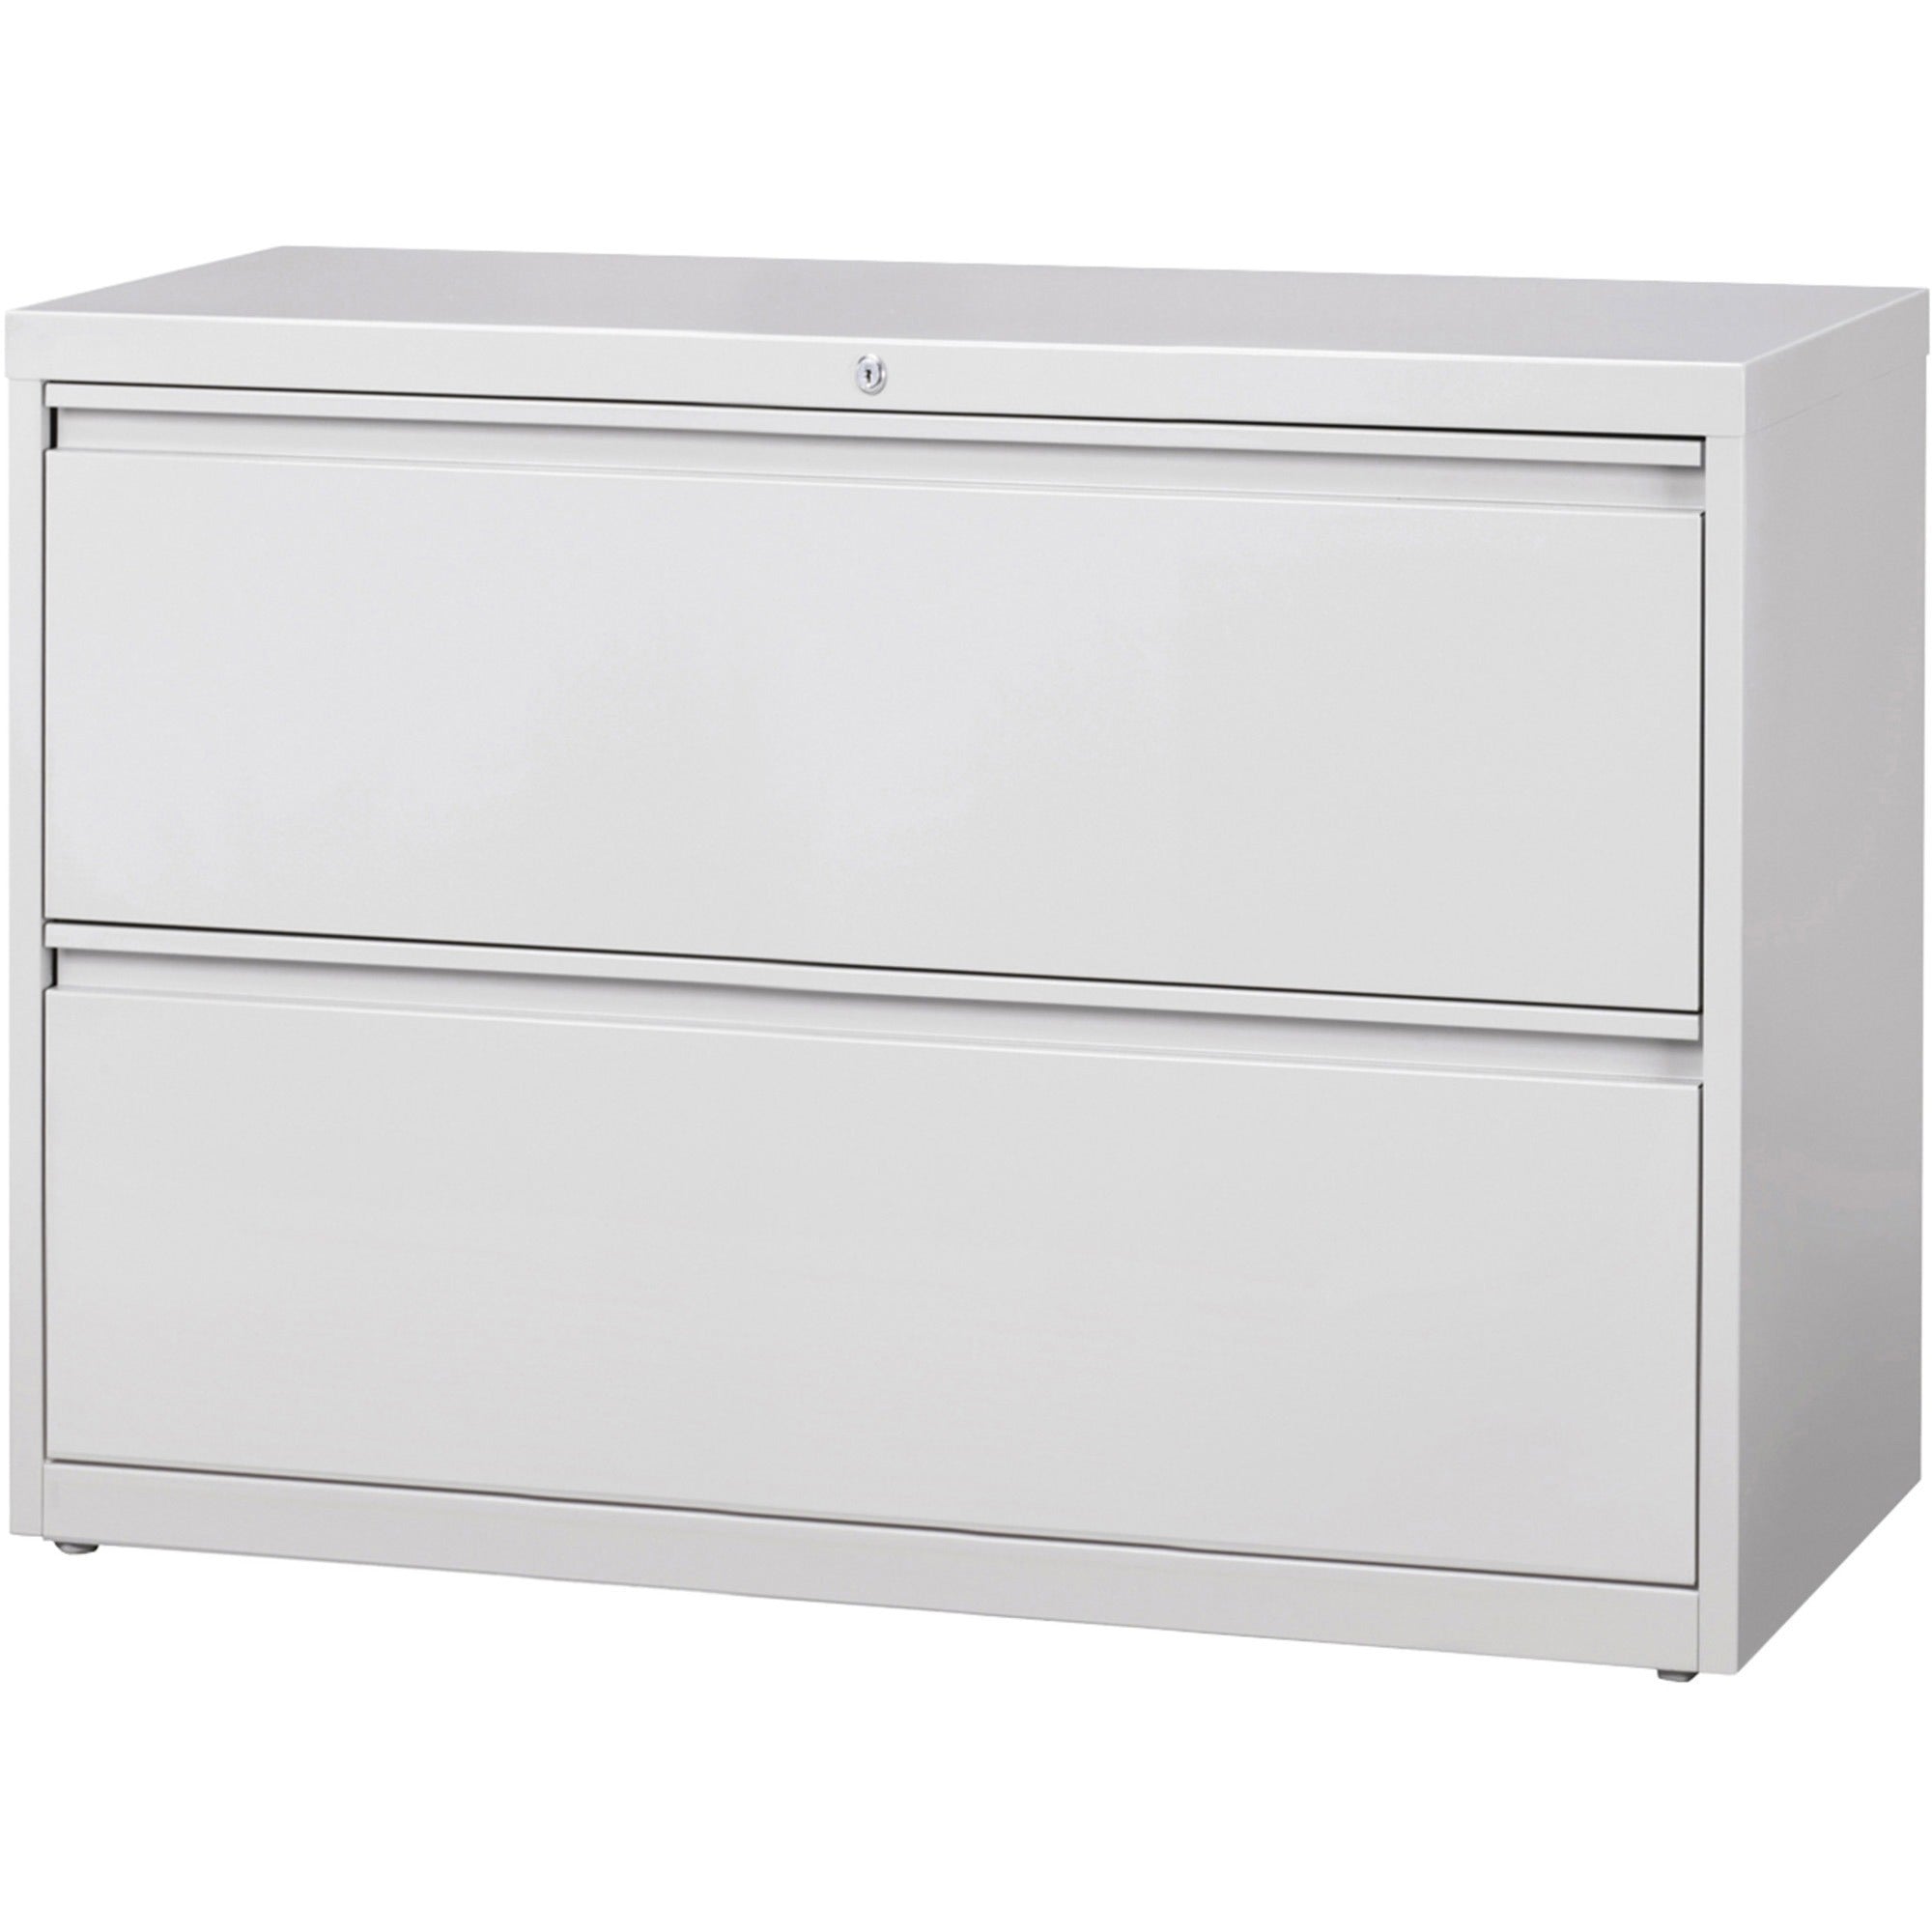 Lorell Fortress Series Lateral File - 42" x 18.6" x 28.1" - 2 x Drawer(s) for File - Legal, Letter, A4 - Lateral - Rust Proof, Leveling Glide, Ball-bearing Suspension, Interlocking, Label Holder - Light Gray - Baked Enamel - Steel - Recycled - 